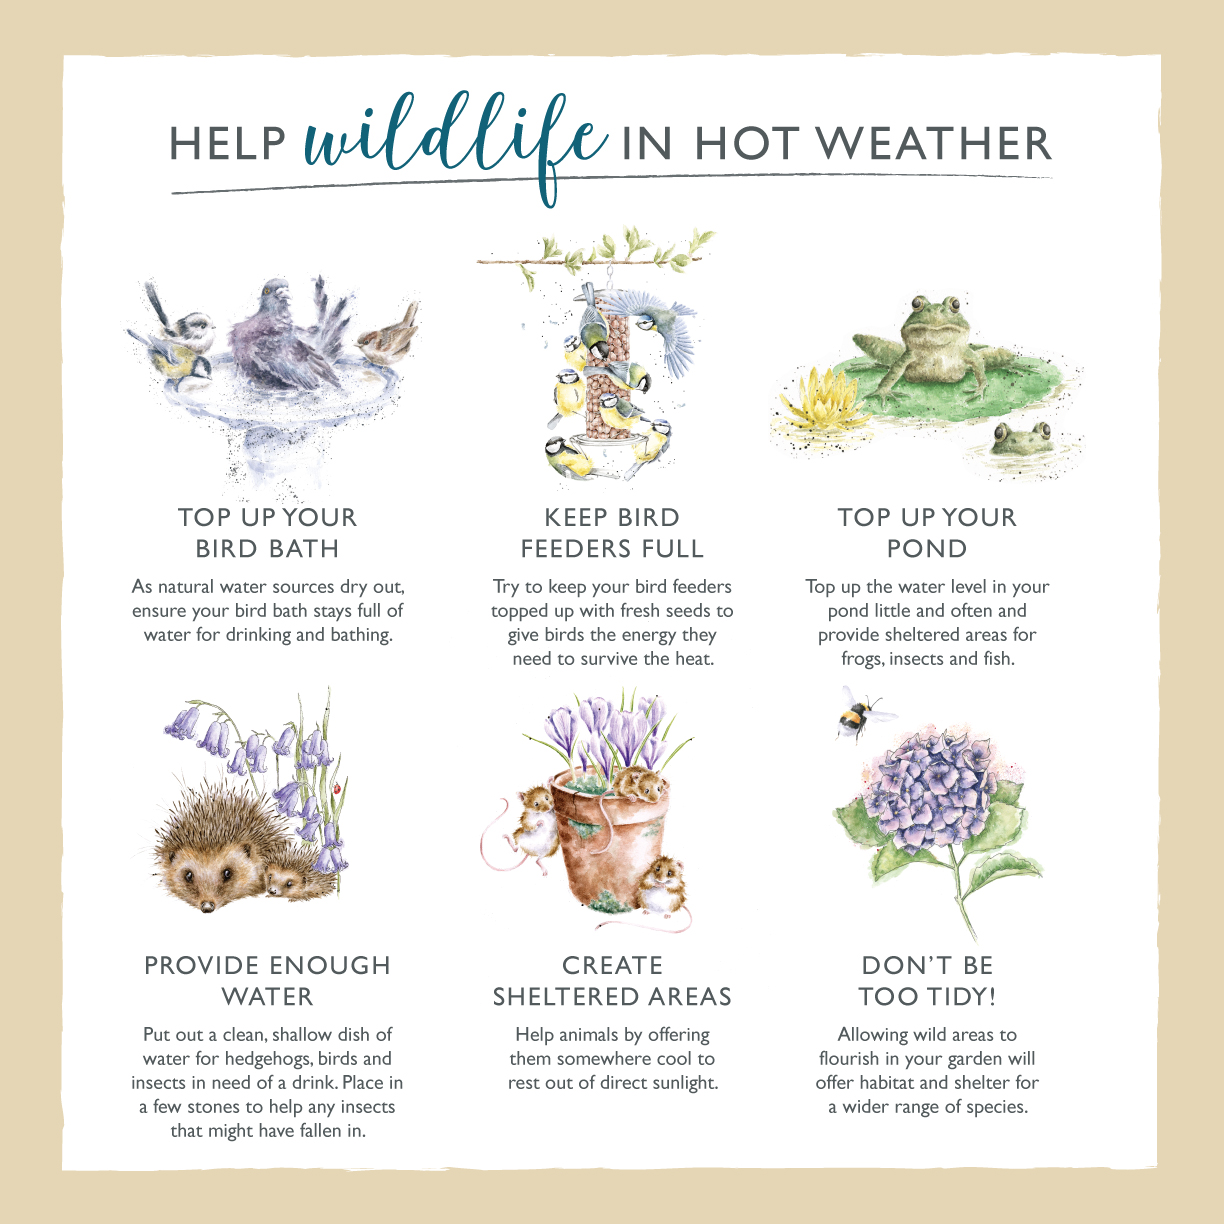 How to help wildlife in hot weather